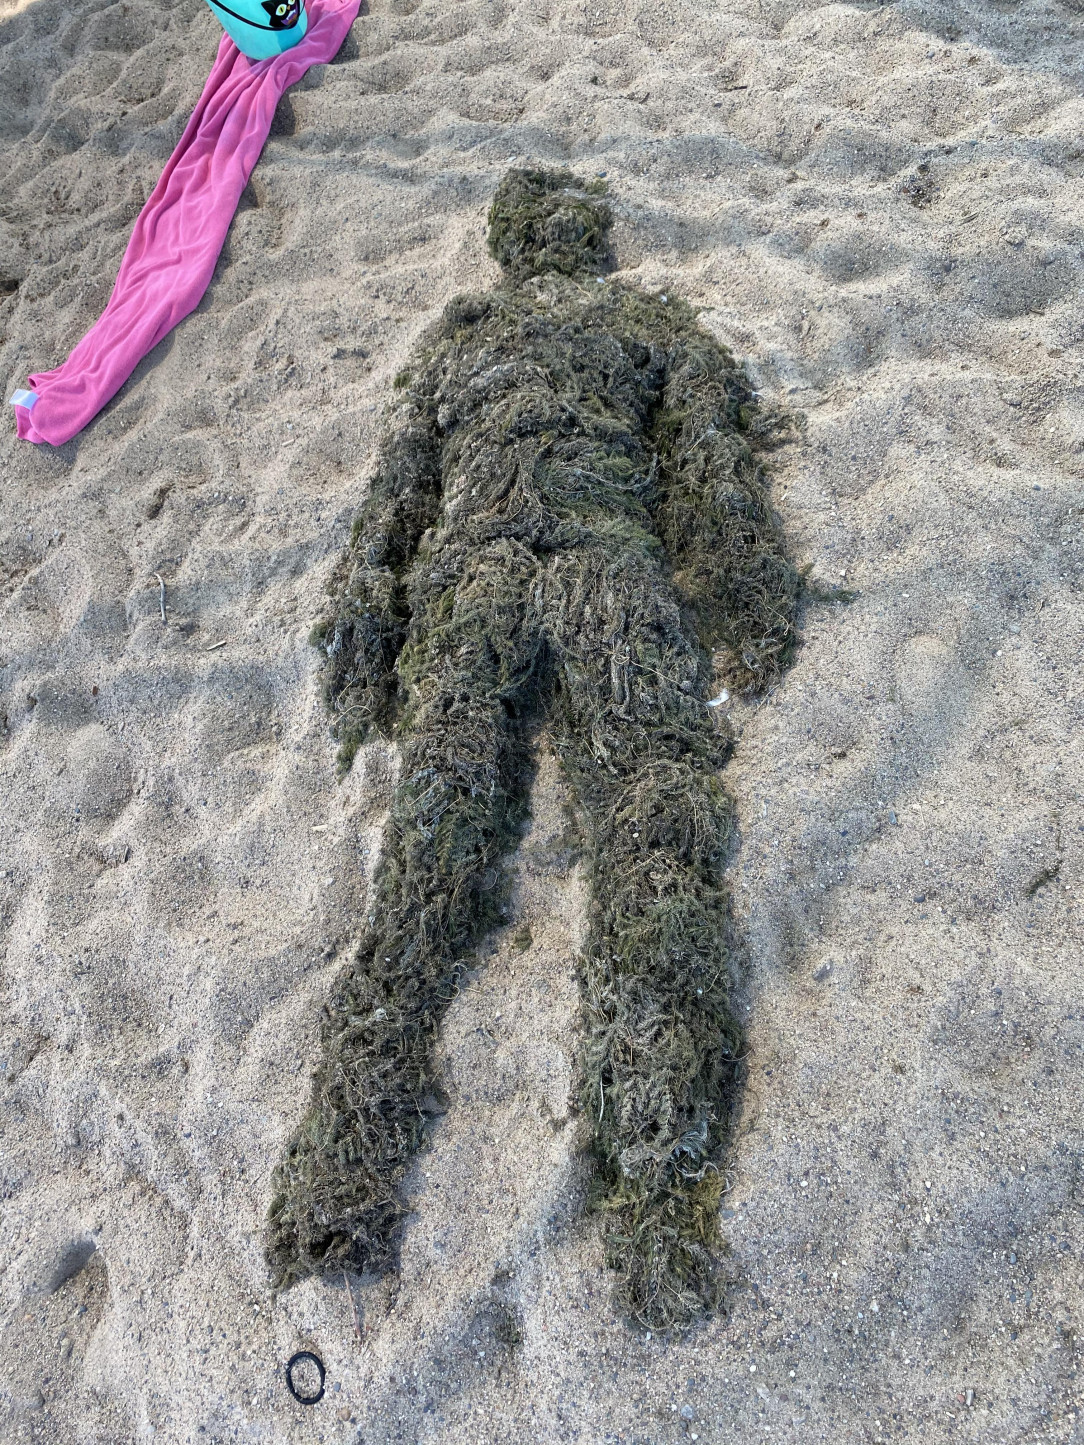 A human made from seaweed